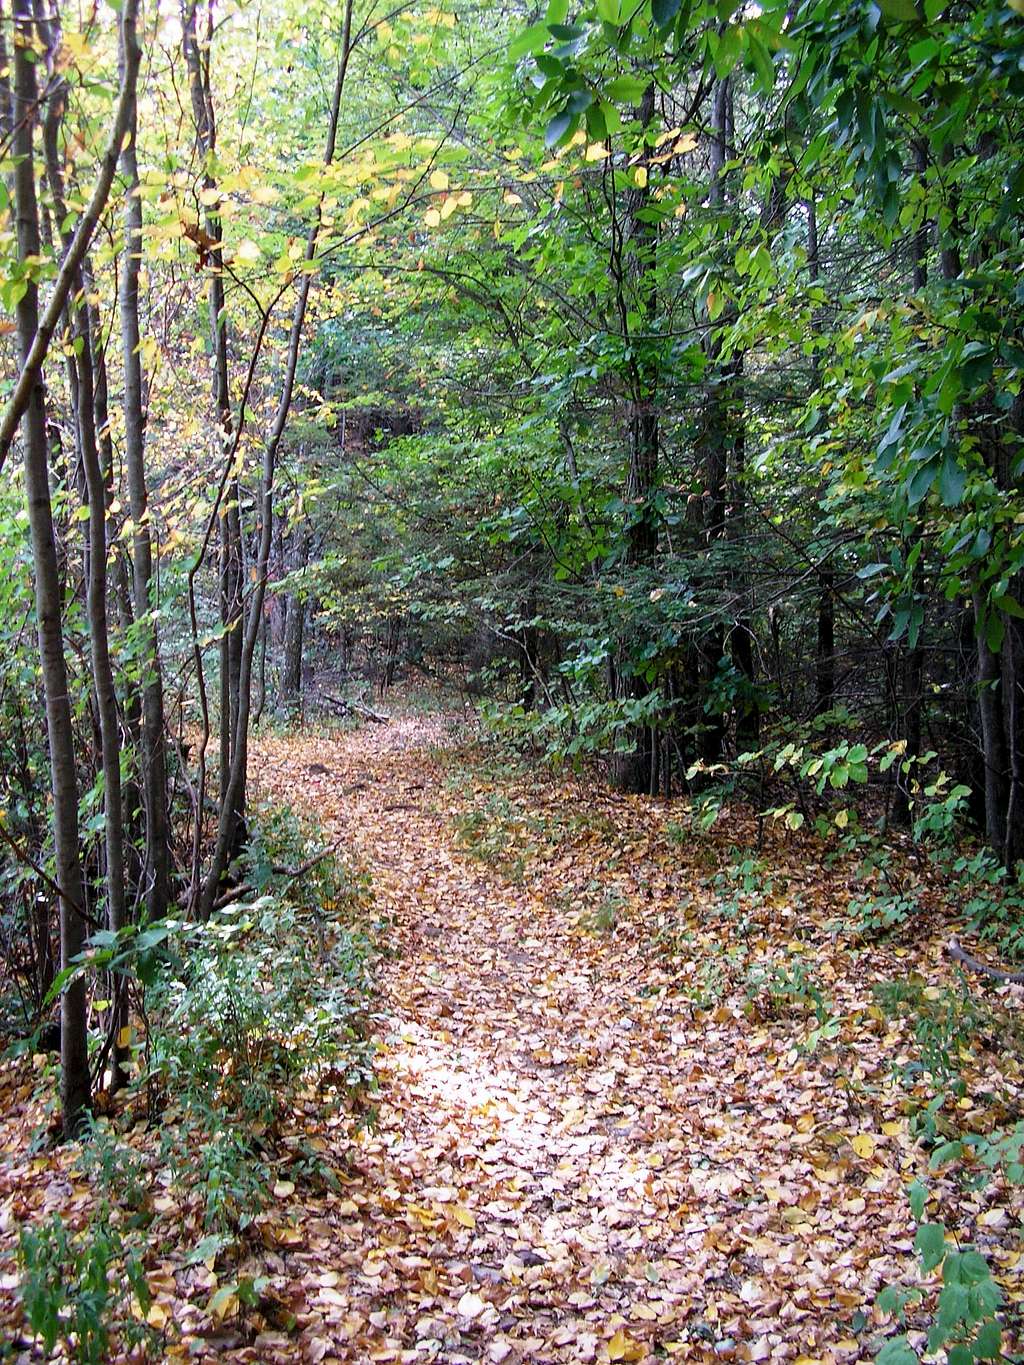 Leaves on the trail